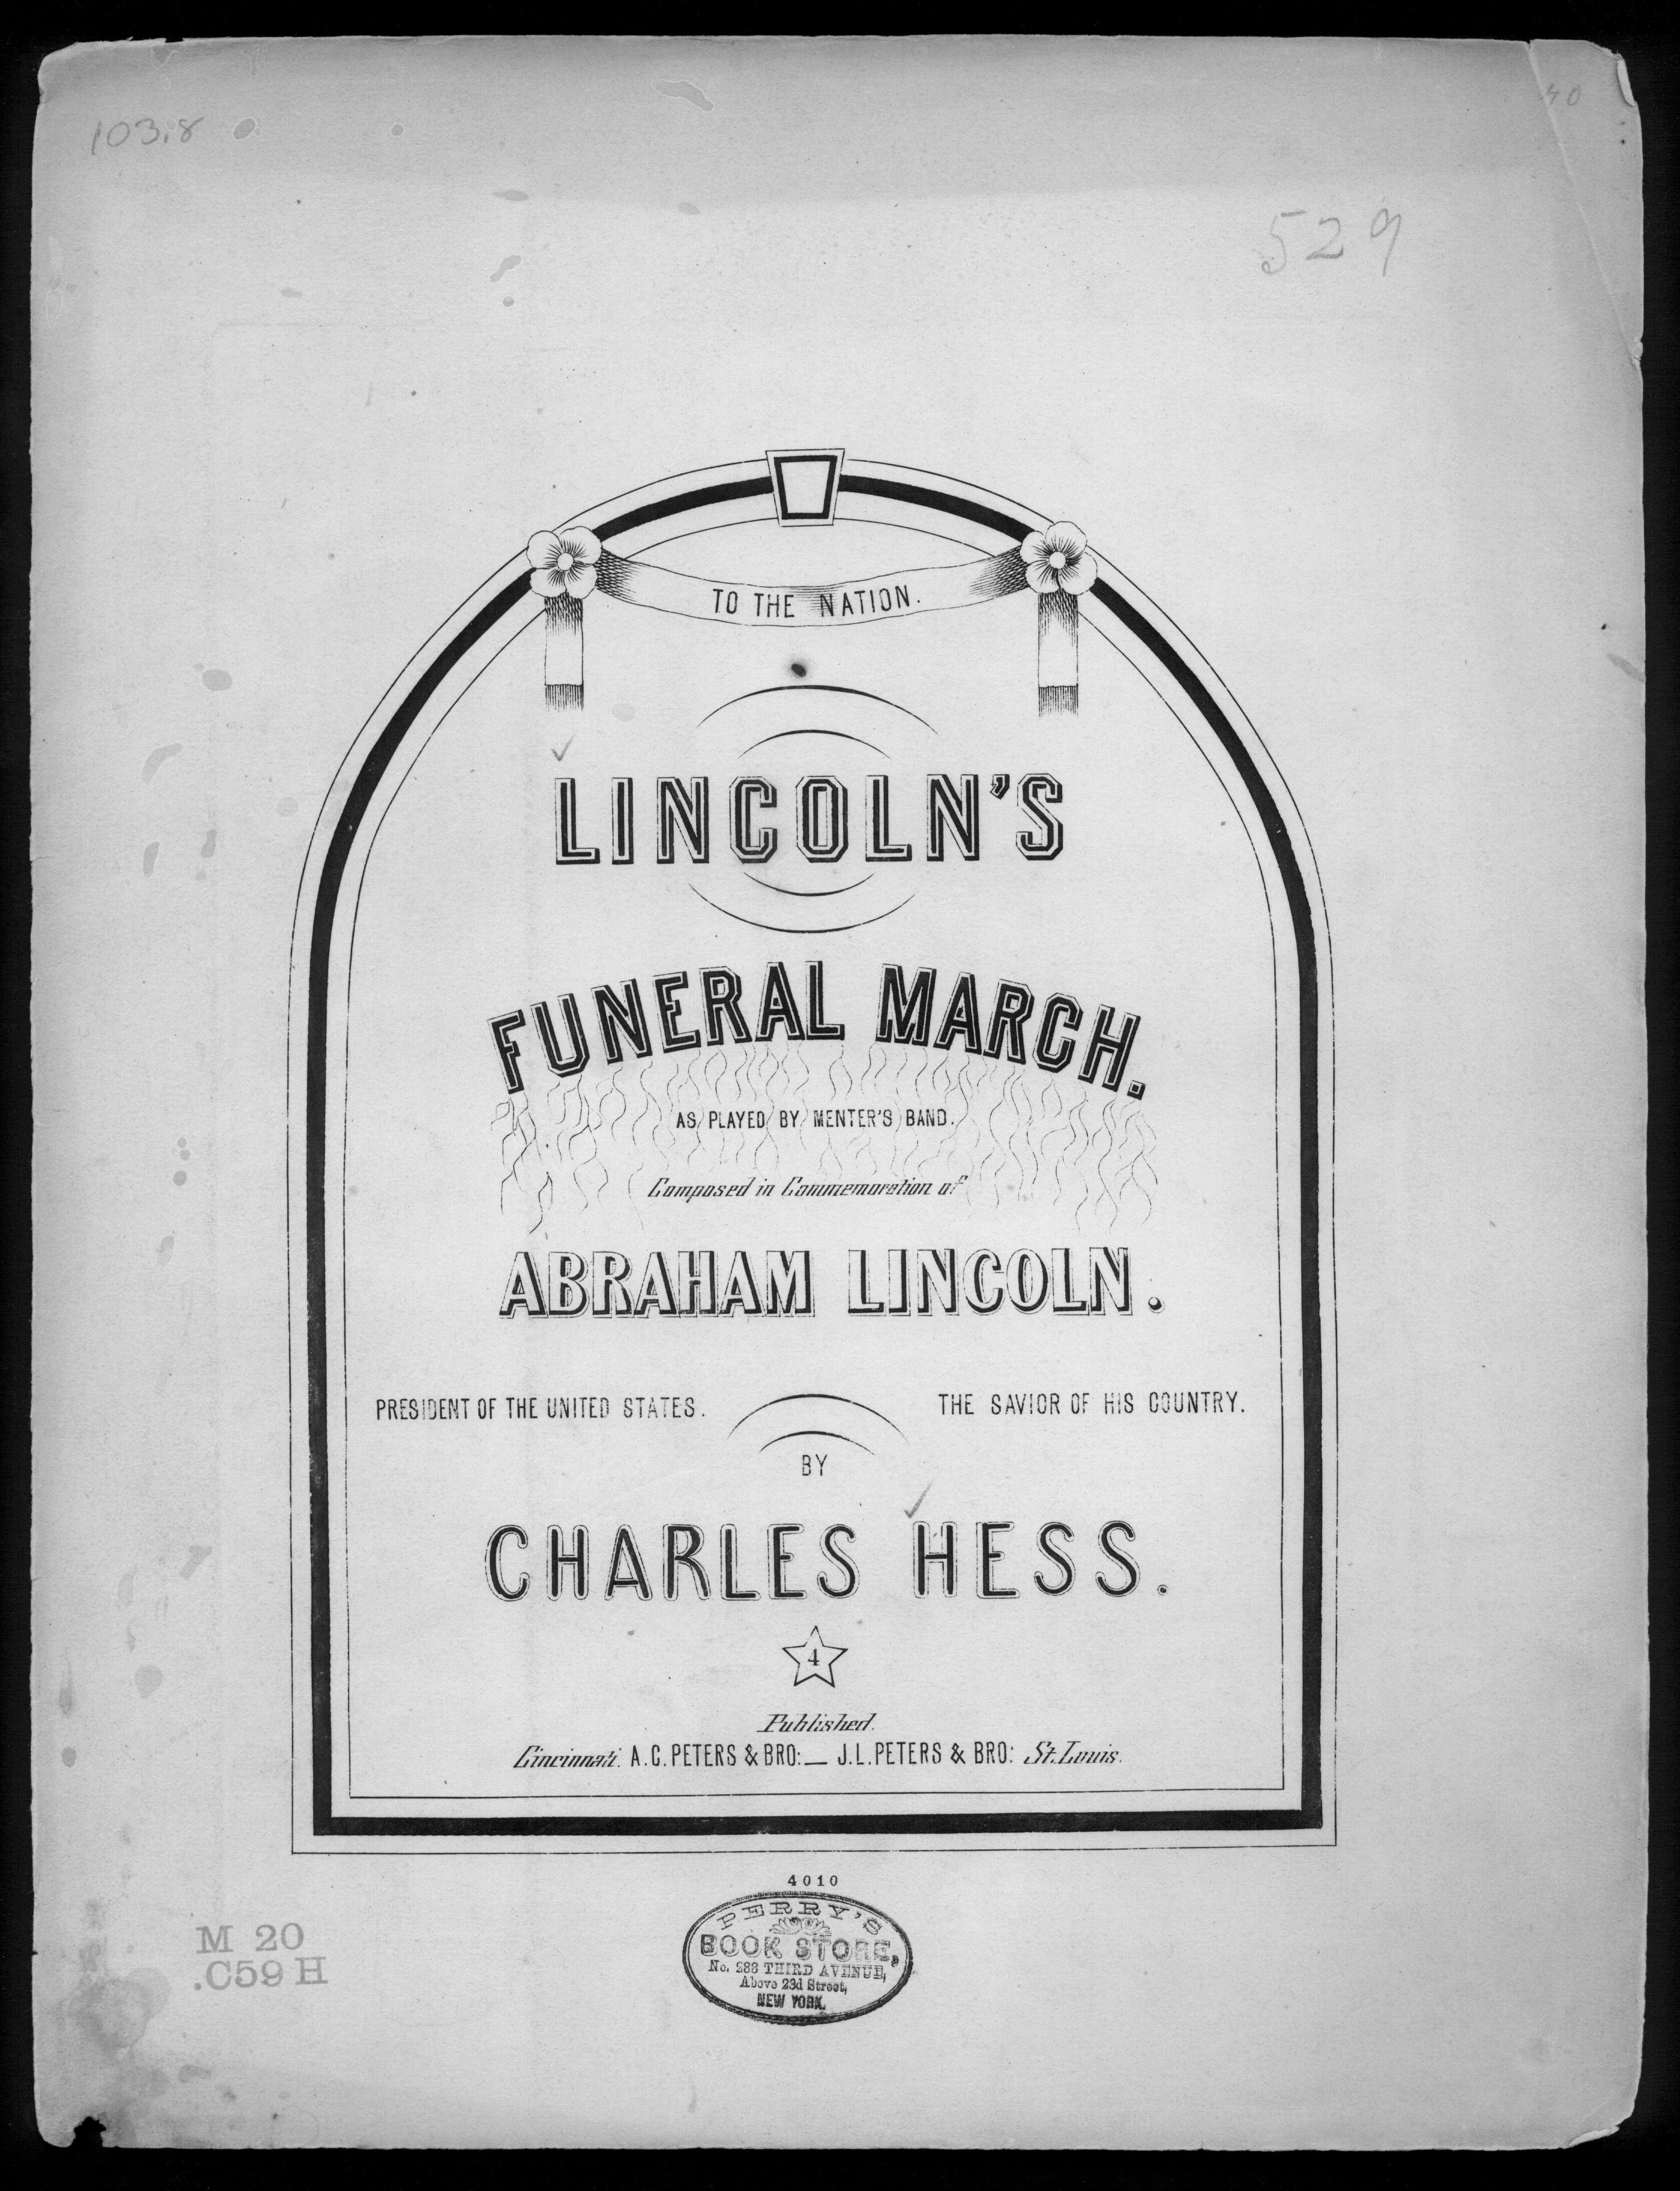 Lincoln's funeral march: as played by Menter's Band